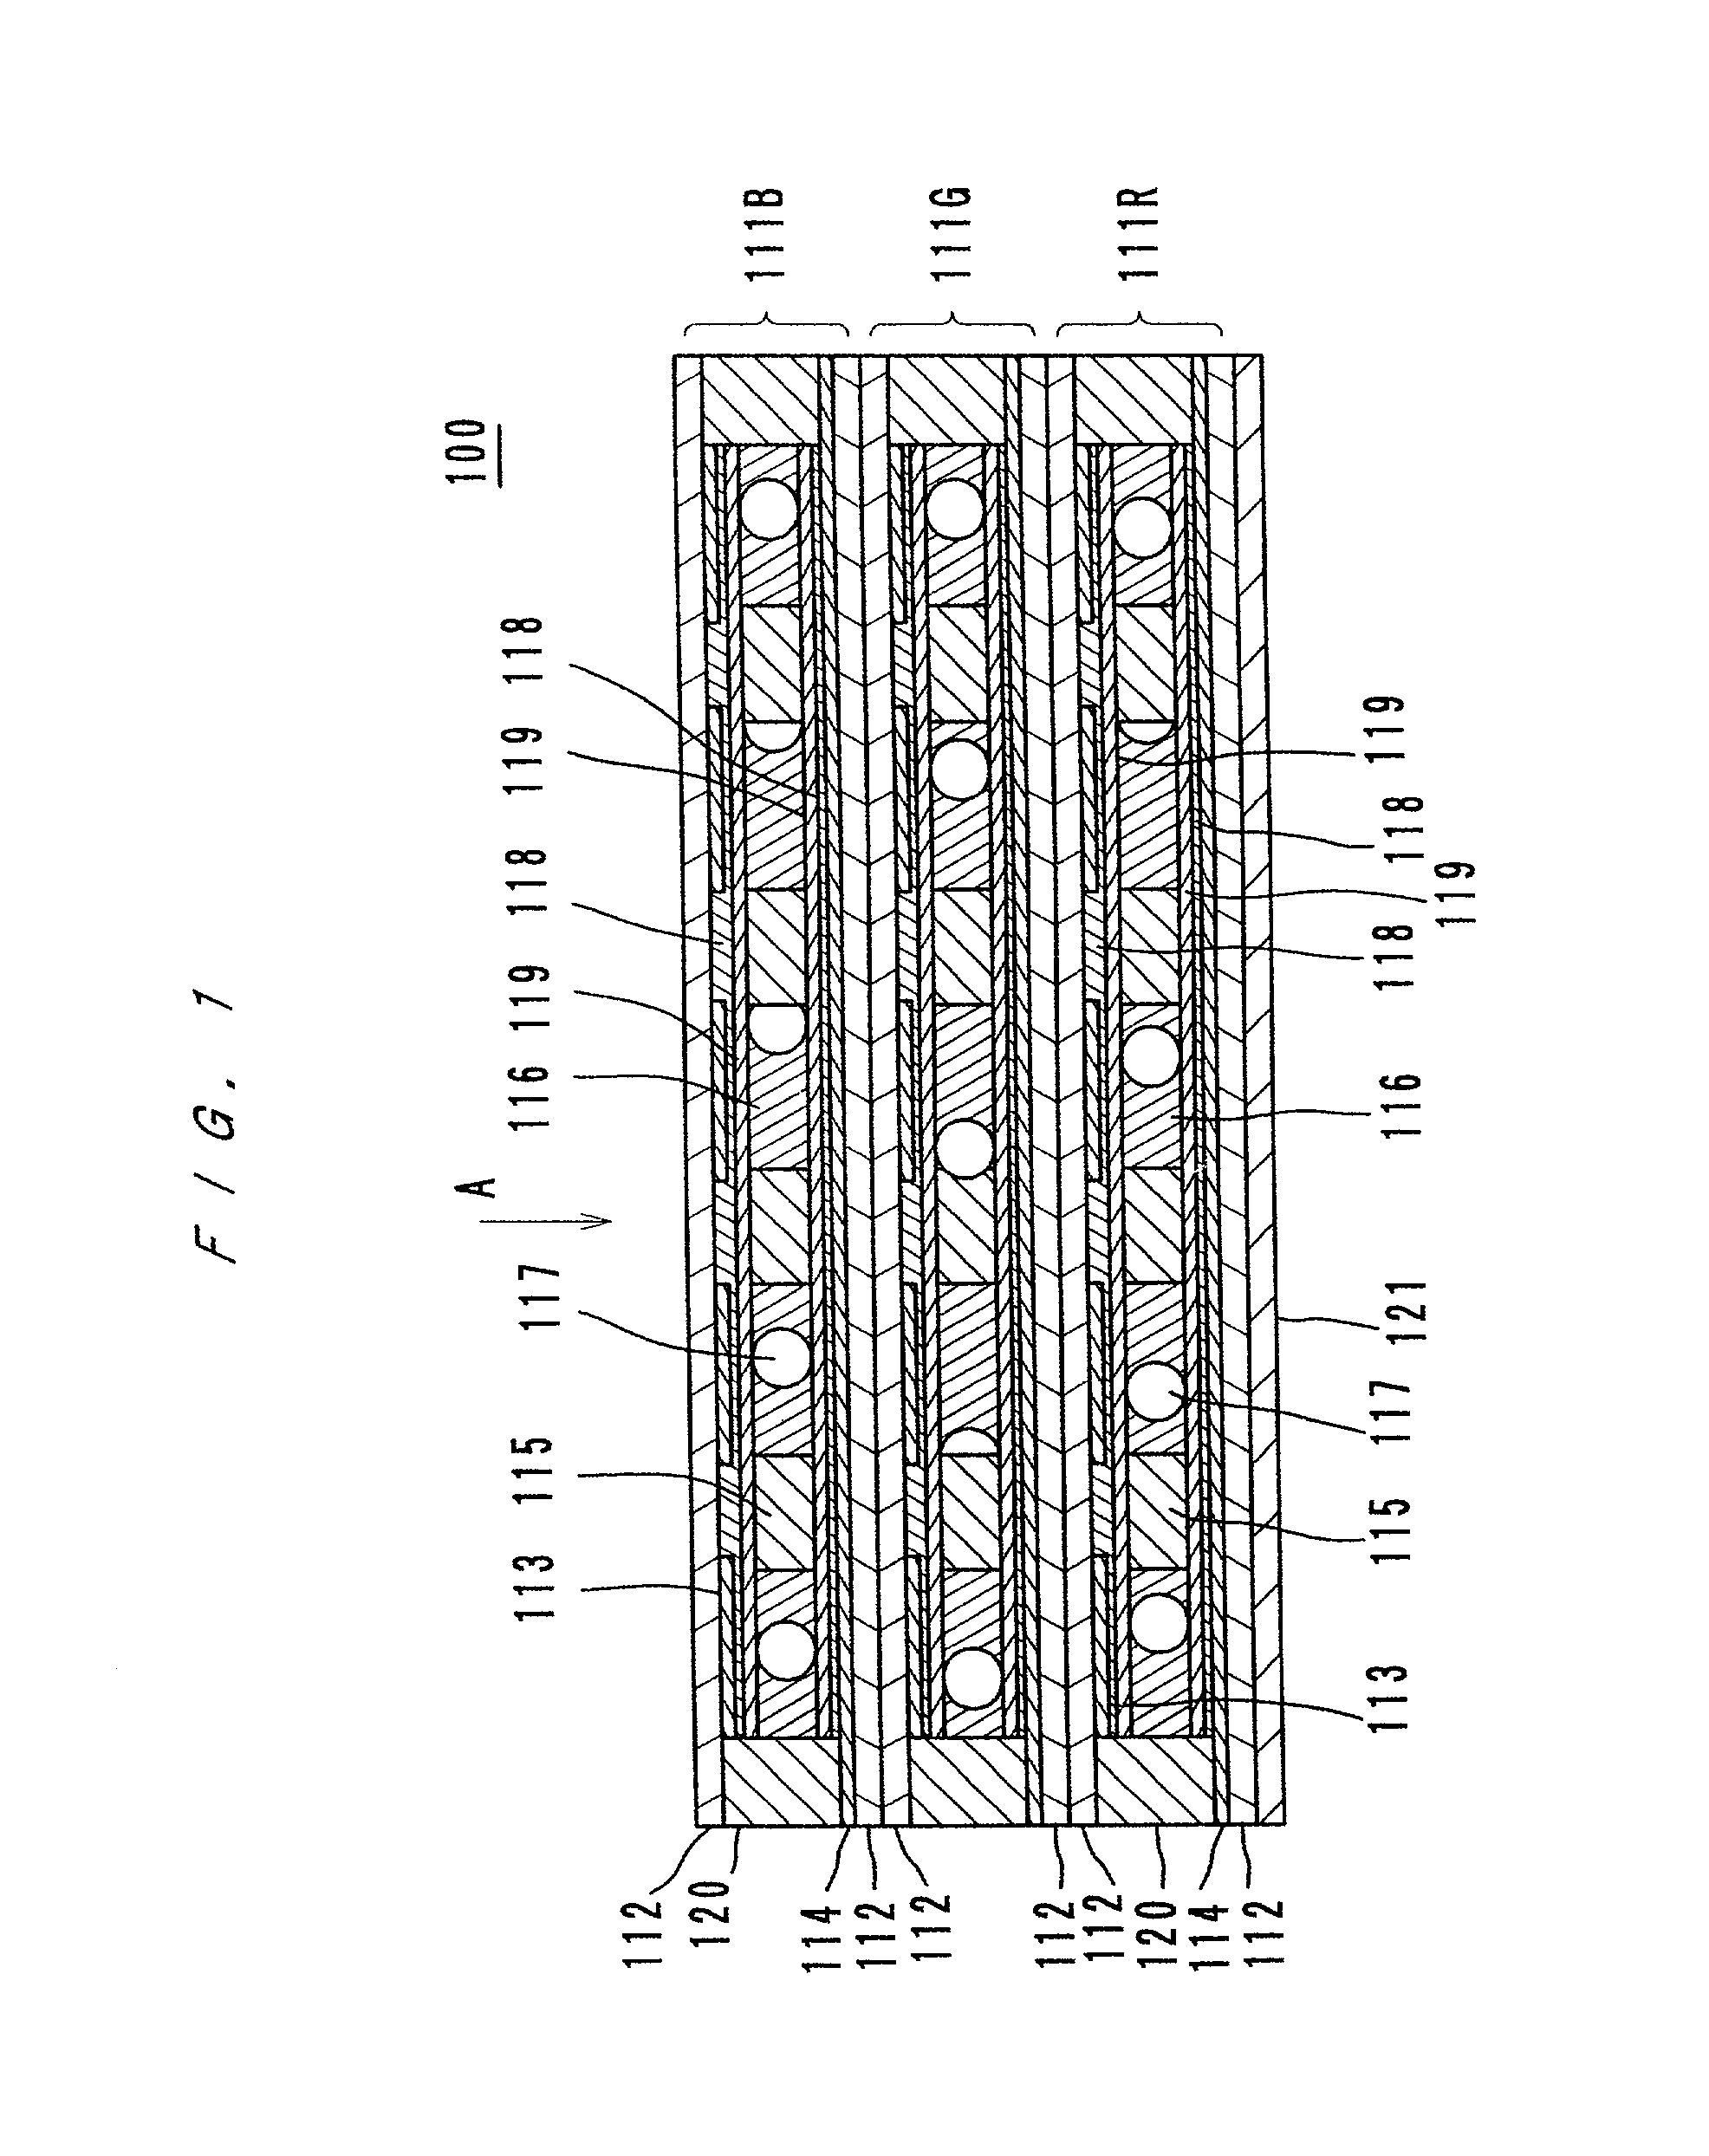 Liquid crystal display device and method for driving a liquid crystal display